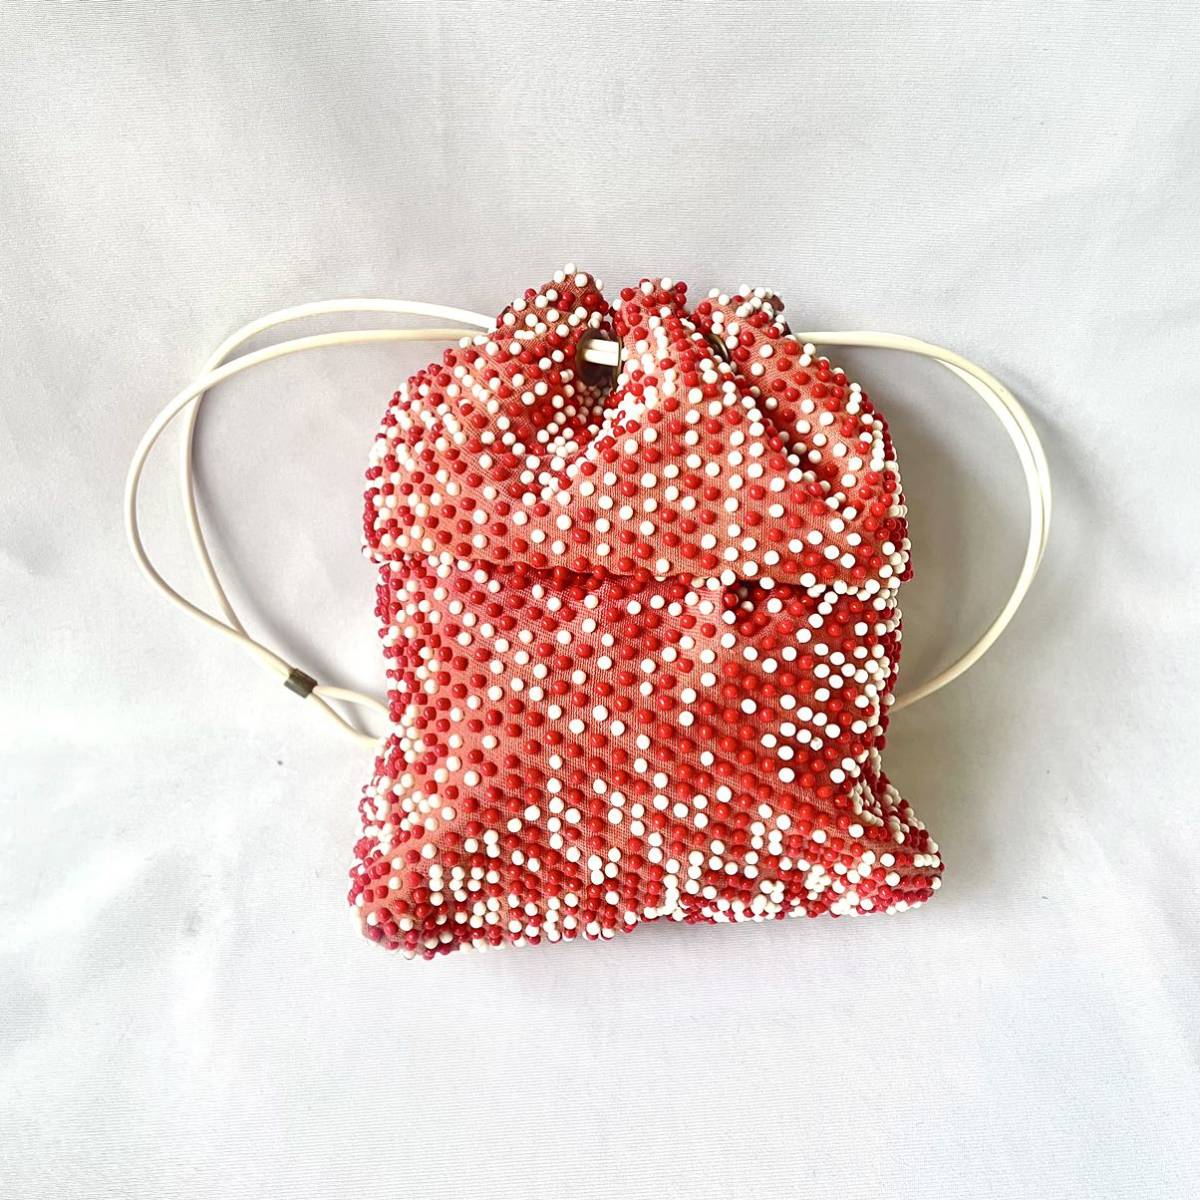 70s vintage pouch bag bag red beads 